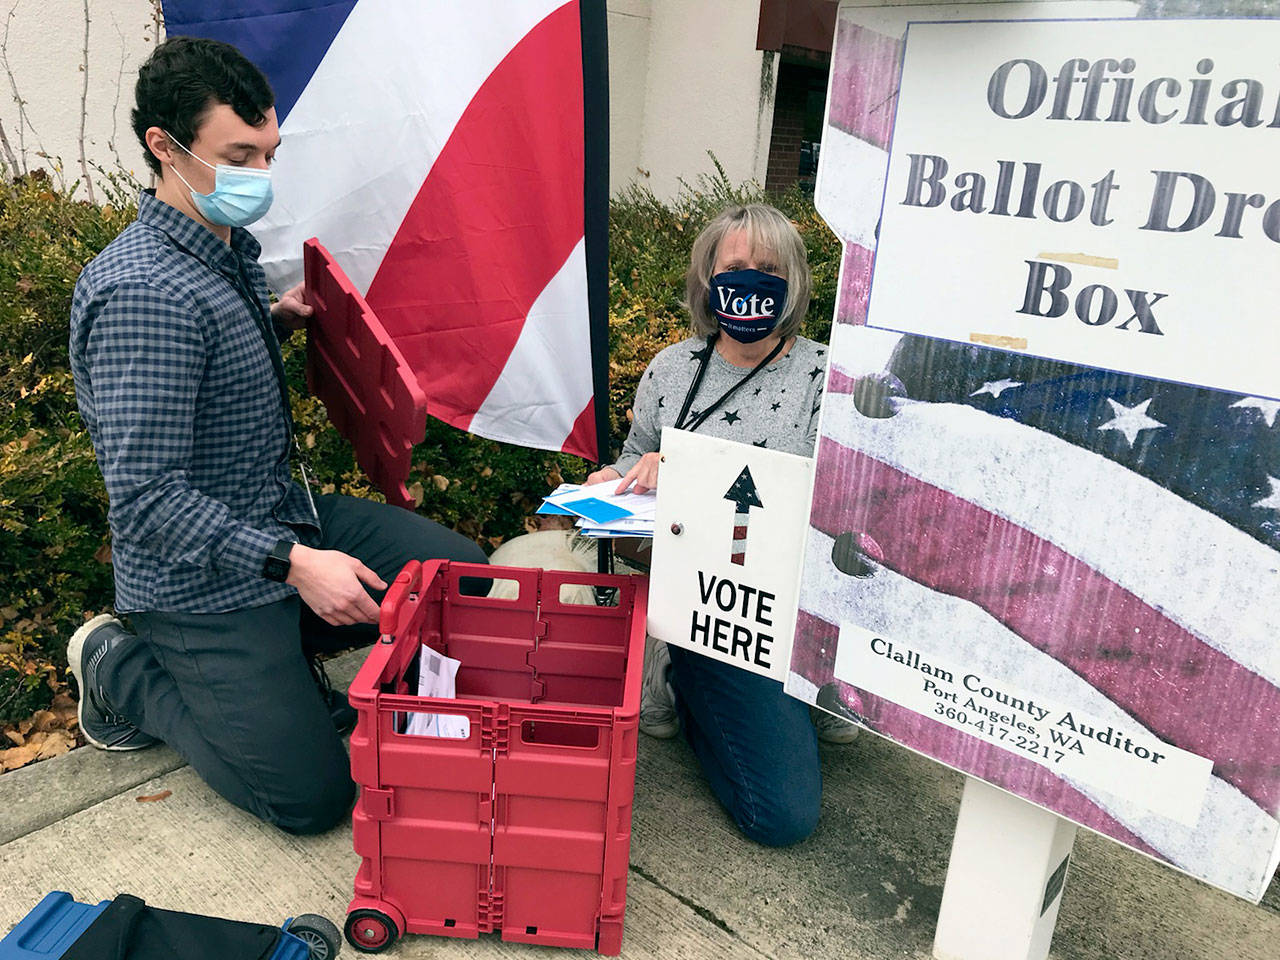 Clallam County election workers Ame Cochnauer, right, and Thomas Newton did their second of at least three ballot pickups Monday, Oct. 26, 2020, from two drop boxes outside the Clallam County Courthouse that hold a combined 1,200 ballots. (Paul Gottlieb/Peninsula Daily News)